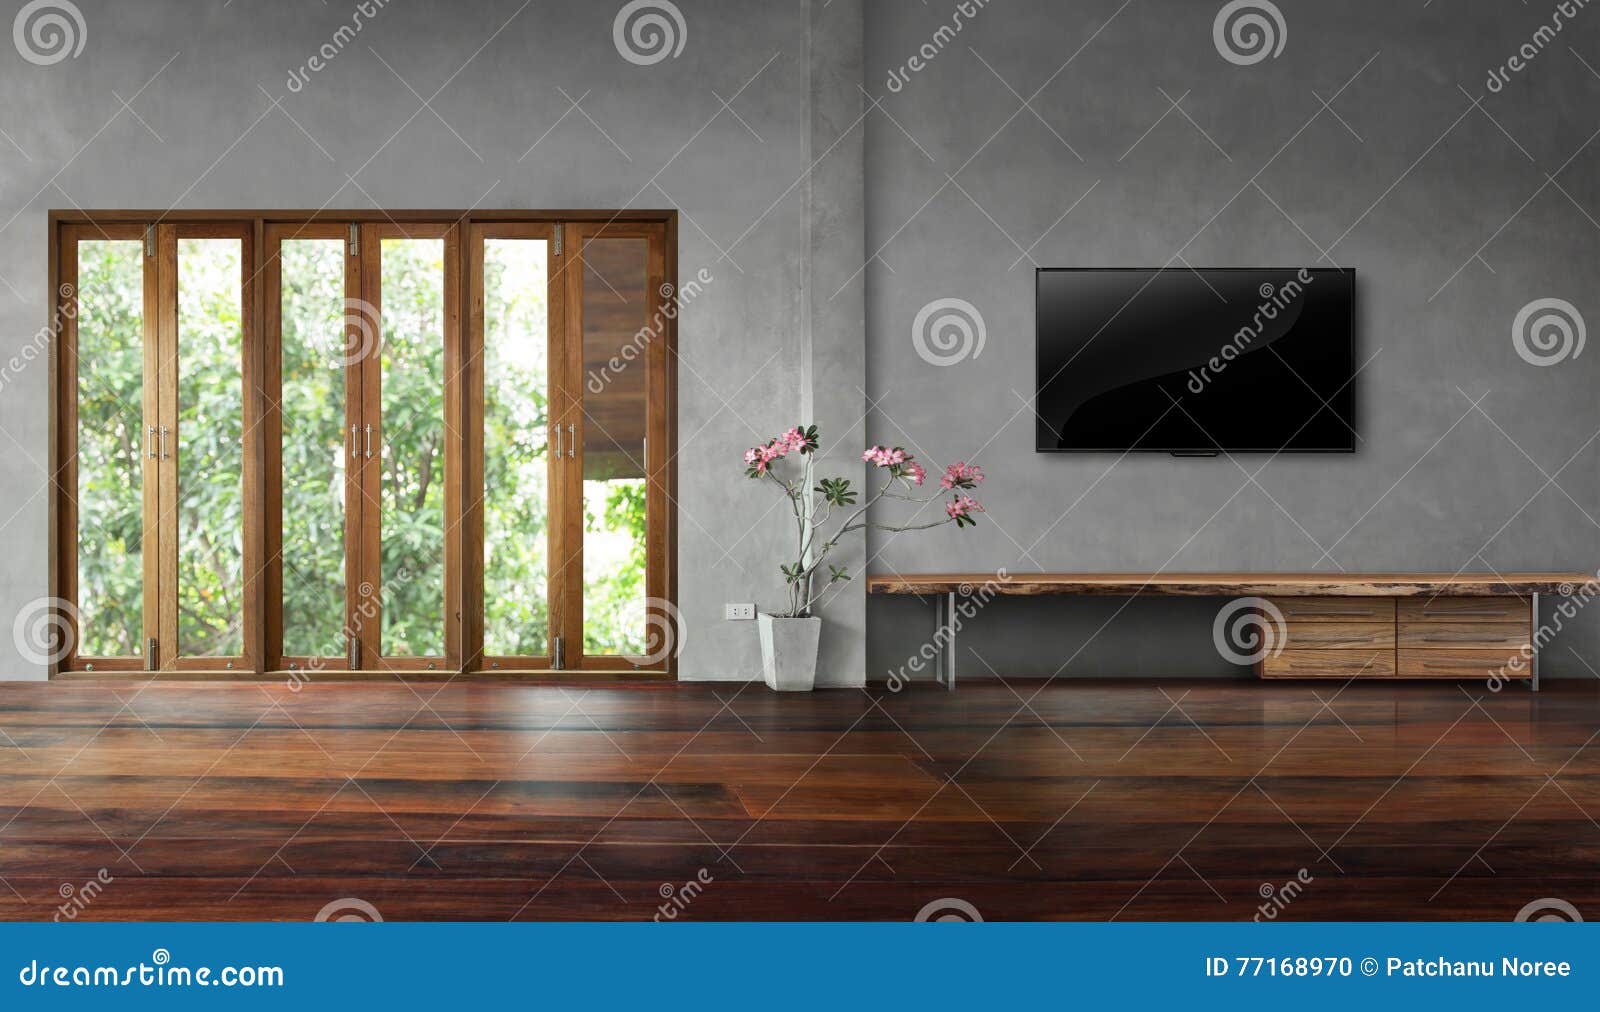 tv on concrete wall with tall windows in old wooden floors empty living room